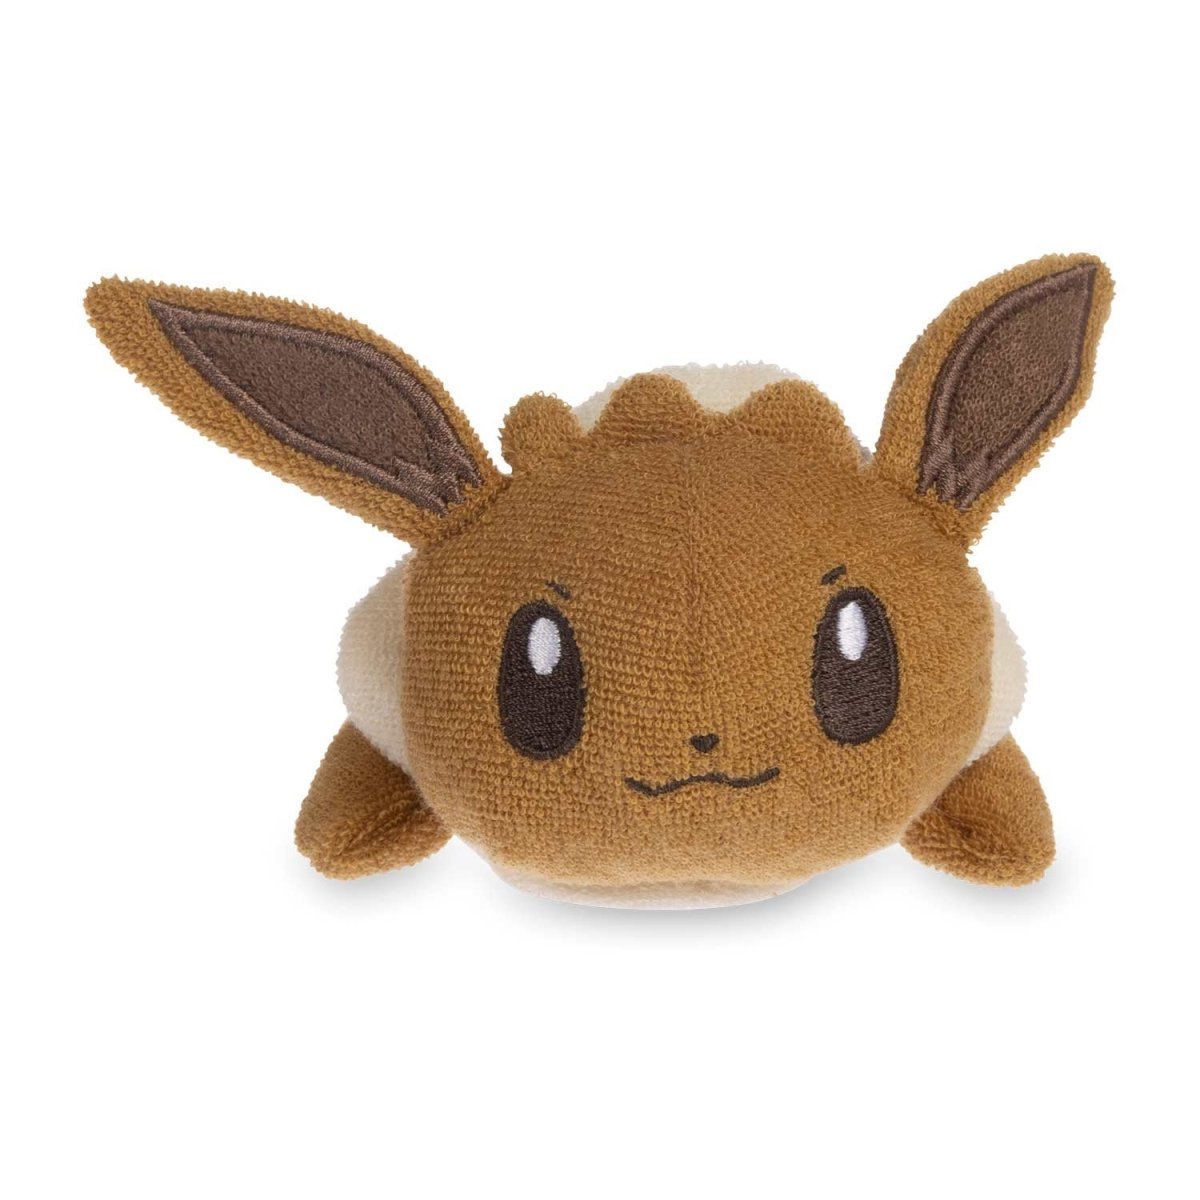 Eevee Fuzzy Plush Backpack / School Bag- SERIOUSLY SOFT!